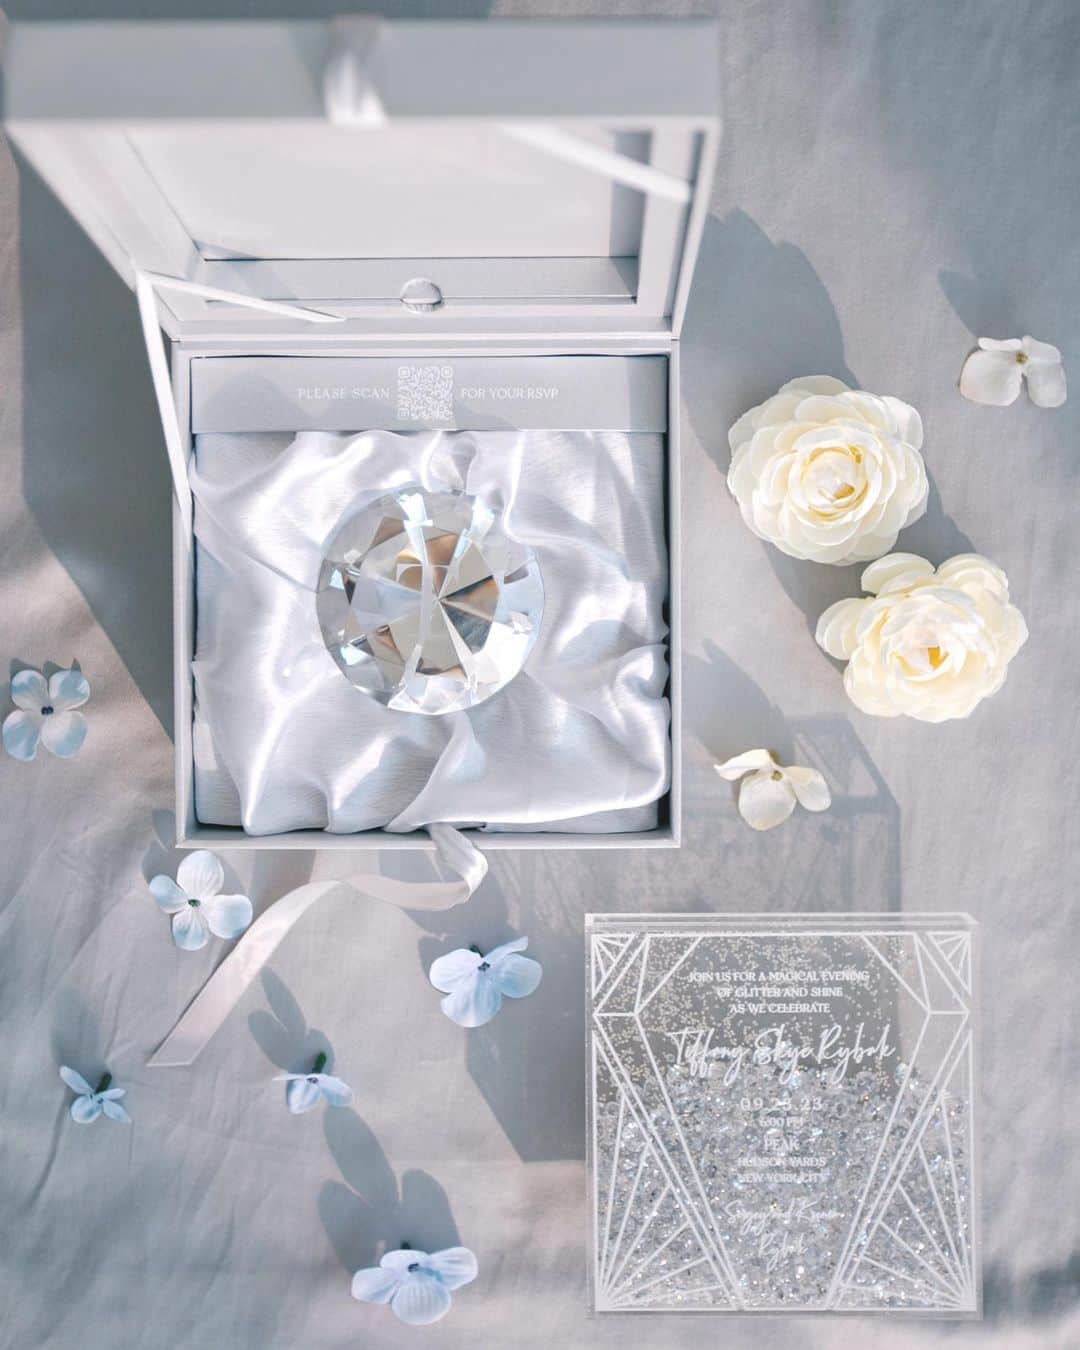 Ceci Johnsonのインスタグラム：「BIRTHDAY | Inspired by the diamond theme, we dreamed up for Tiffany a special couture invitation to commemorate her 3rd birthday milestone. As you open the box, a glass diamond, engraved with the initial T, rests atop a silver silk base, symbolizing the wish to 'shine bright like a diamond’. Inside the box's lid reveals a transparent acrylic invitation filled with diamonds and glitter cascading freely within. Every detail of the dreamy invitation is made by hand and a lot of love for Tiffany and the Rybak family.   Swipe to the end for a cute surprise of the birthday girl sitting in her life-size invitation! #CeciCouture  ⠀⠀⠀⠀⠀⠀⠀⠀⠀ CREATIVE PARTNERS Invitation Design: @cecinewyork Event planner: @amgeventsandvisuals  Event design: @aramatevents ⠀⠀⠀⠀⠀⠀⠀⠀⠀ Swipe to the end for a little cute surprise 🎁   #cecibirthday #coutureinvitations #birthdayprincess #shininginvitation #shinebrightlikeadiamond #luxuryinvitations #kidsbirthday」